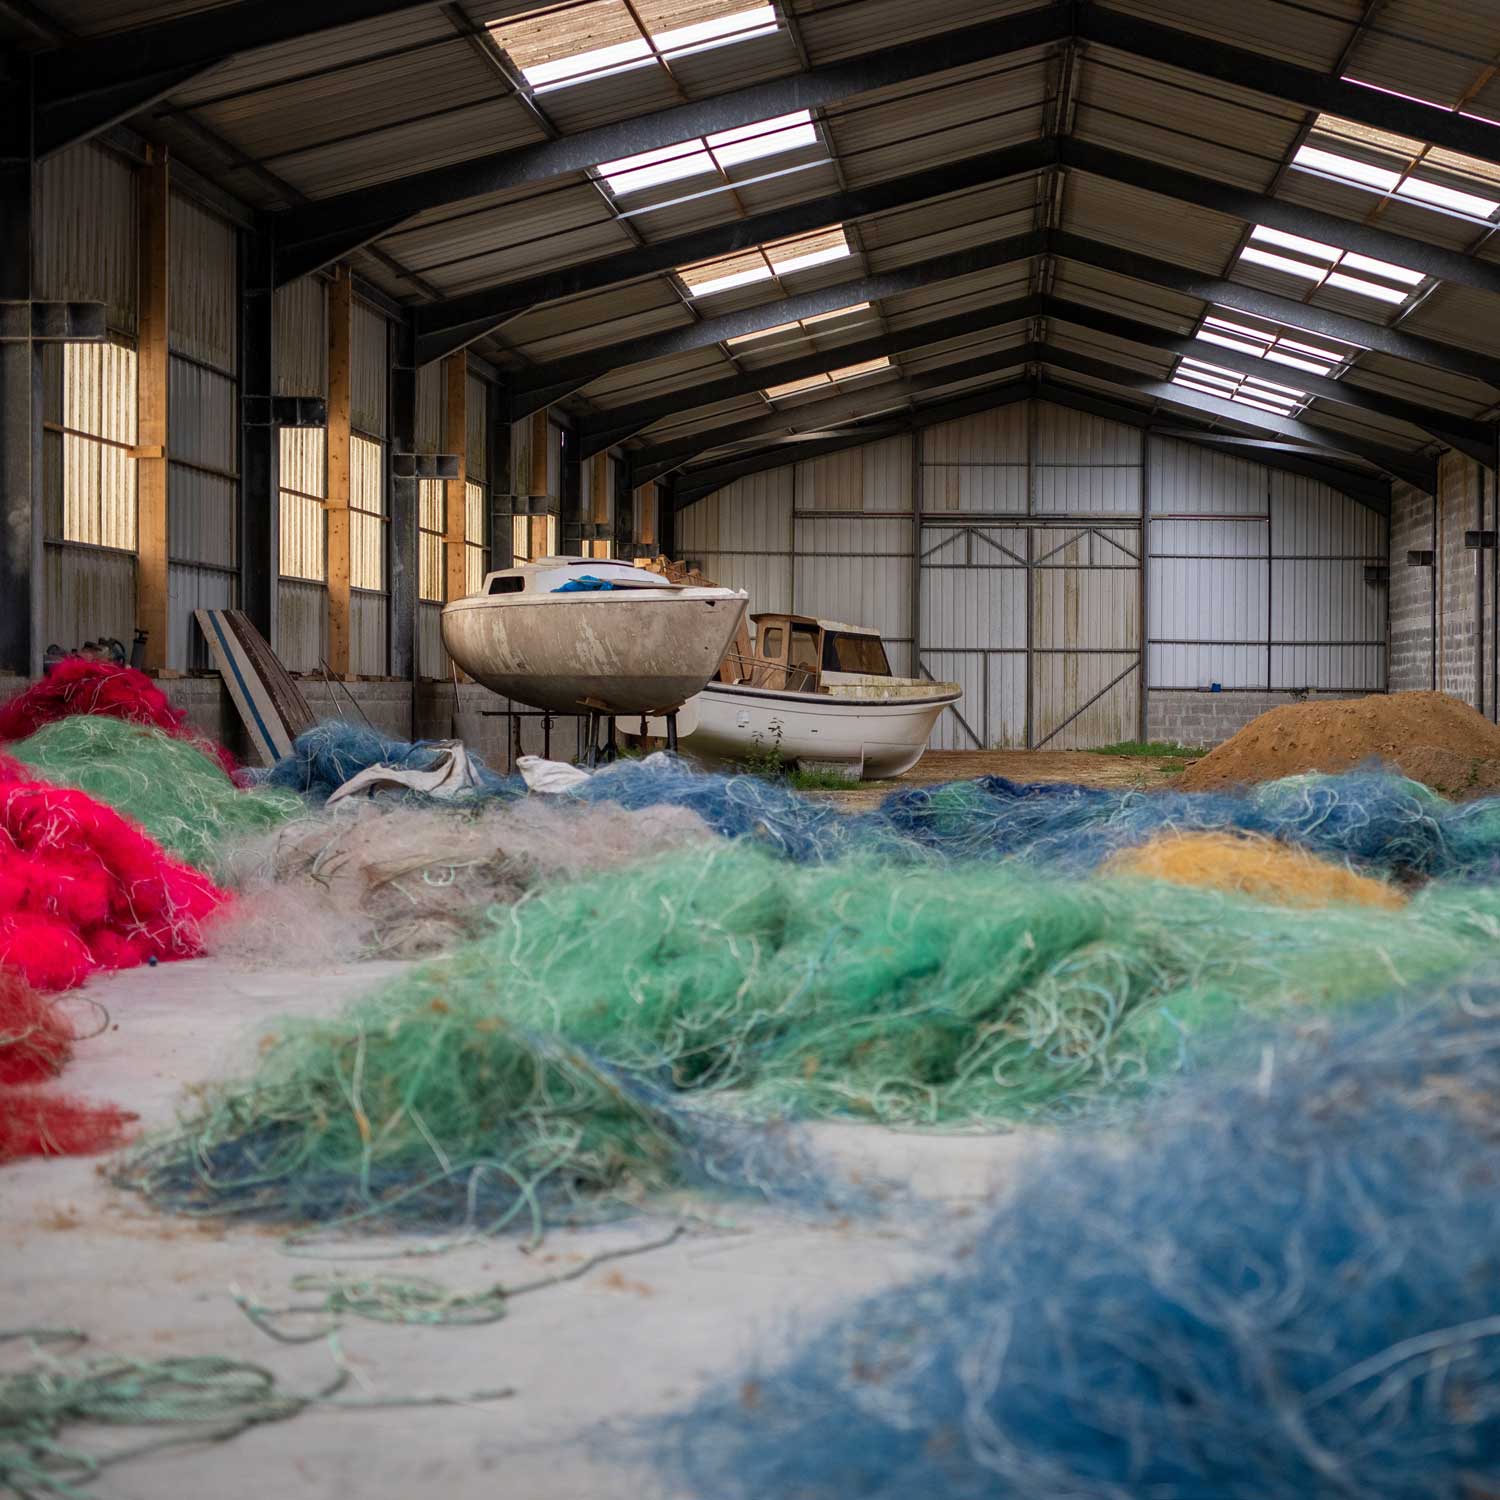 The thousands of tons of discarded fishing nets represent a severe pollution problem. Ulysse Nardin is one of the companies addressing it by collecting it from the oceans and giving them new life. Fil & Fab is a French company specializing in recovering these old, nasty nets and transforming them into polyamide pellets that can become reusable fabrics.